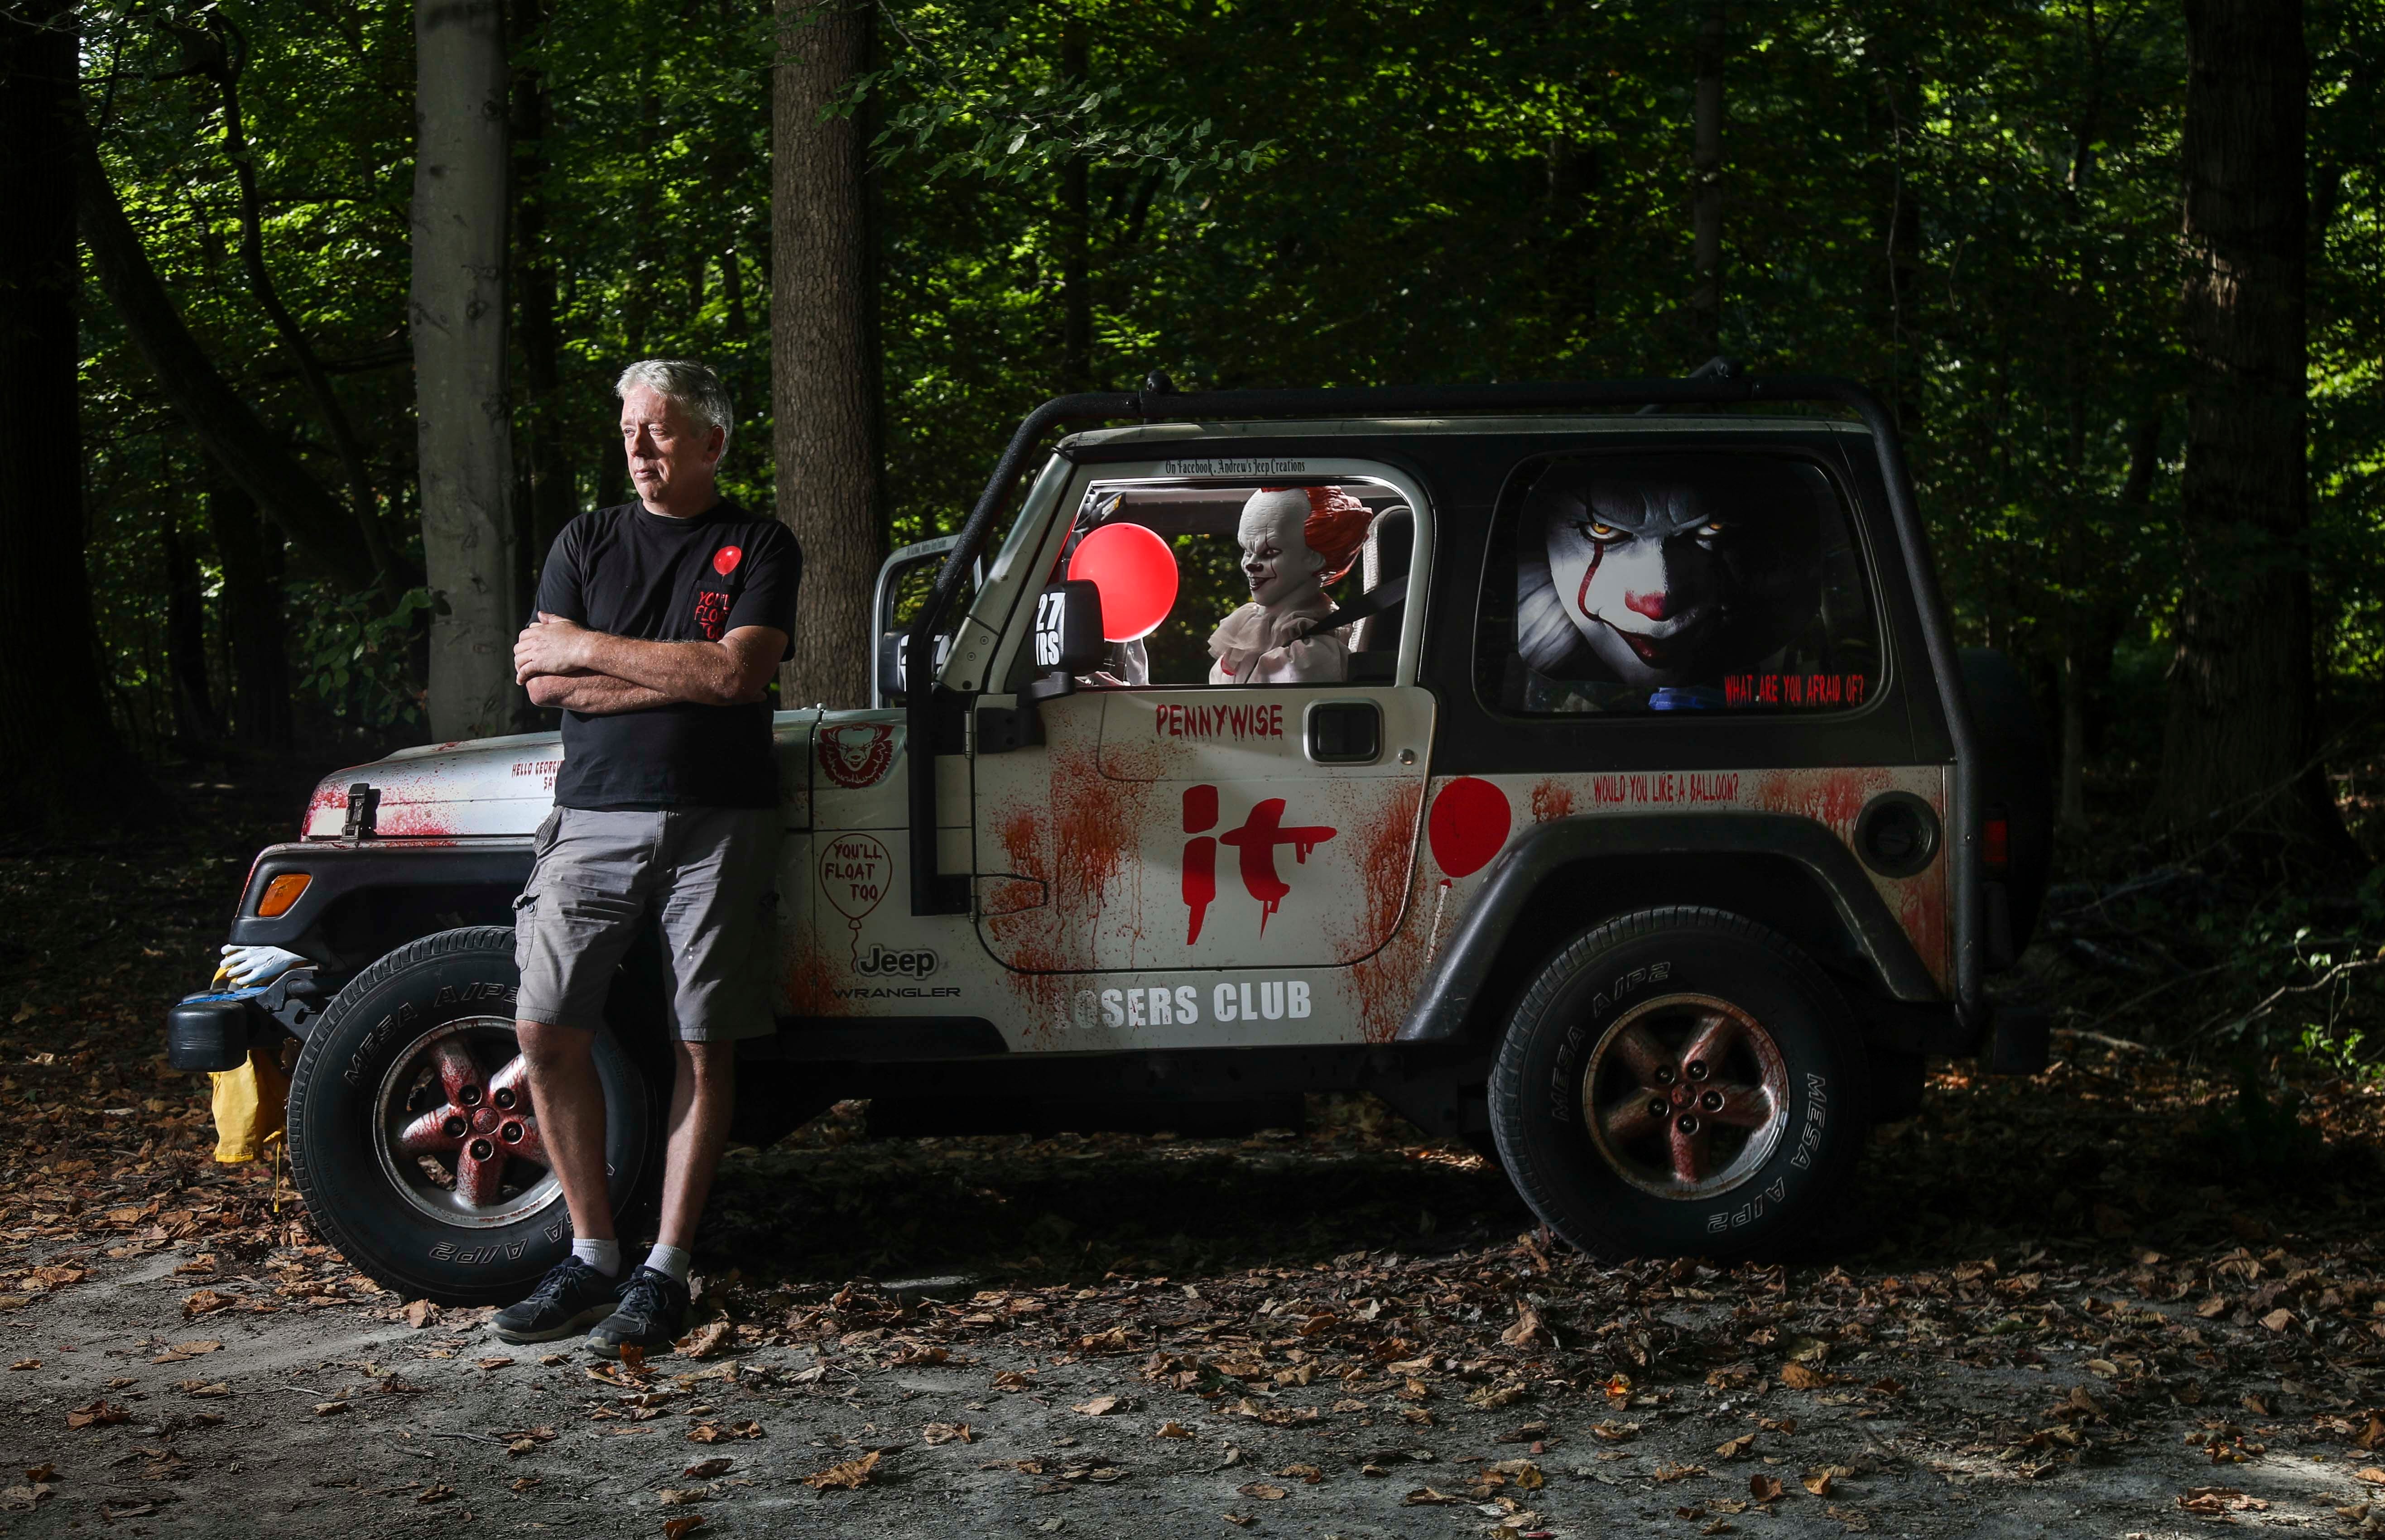 Louisville man drives 'It' movie themed Jeep, with Pennywise driving